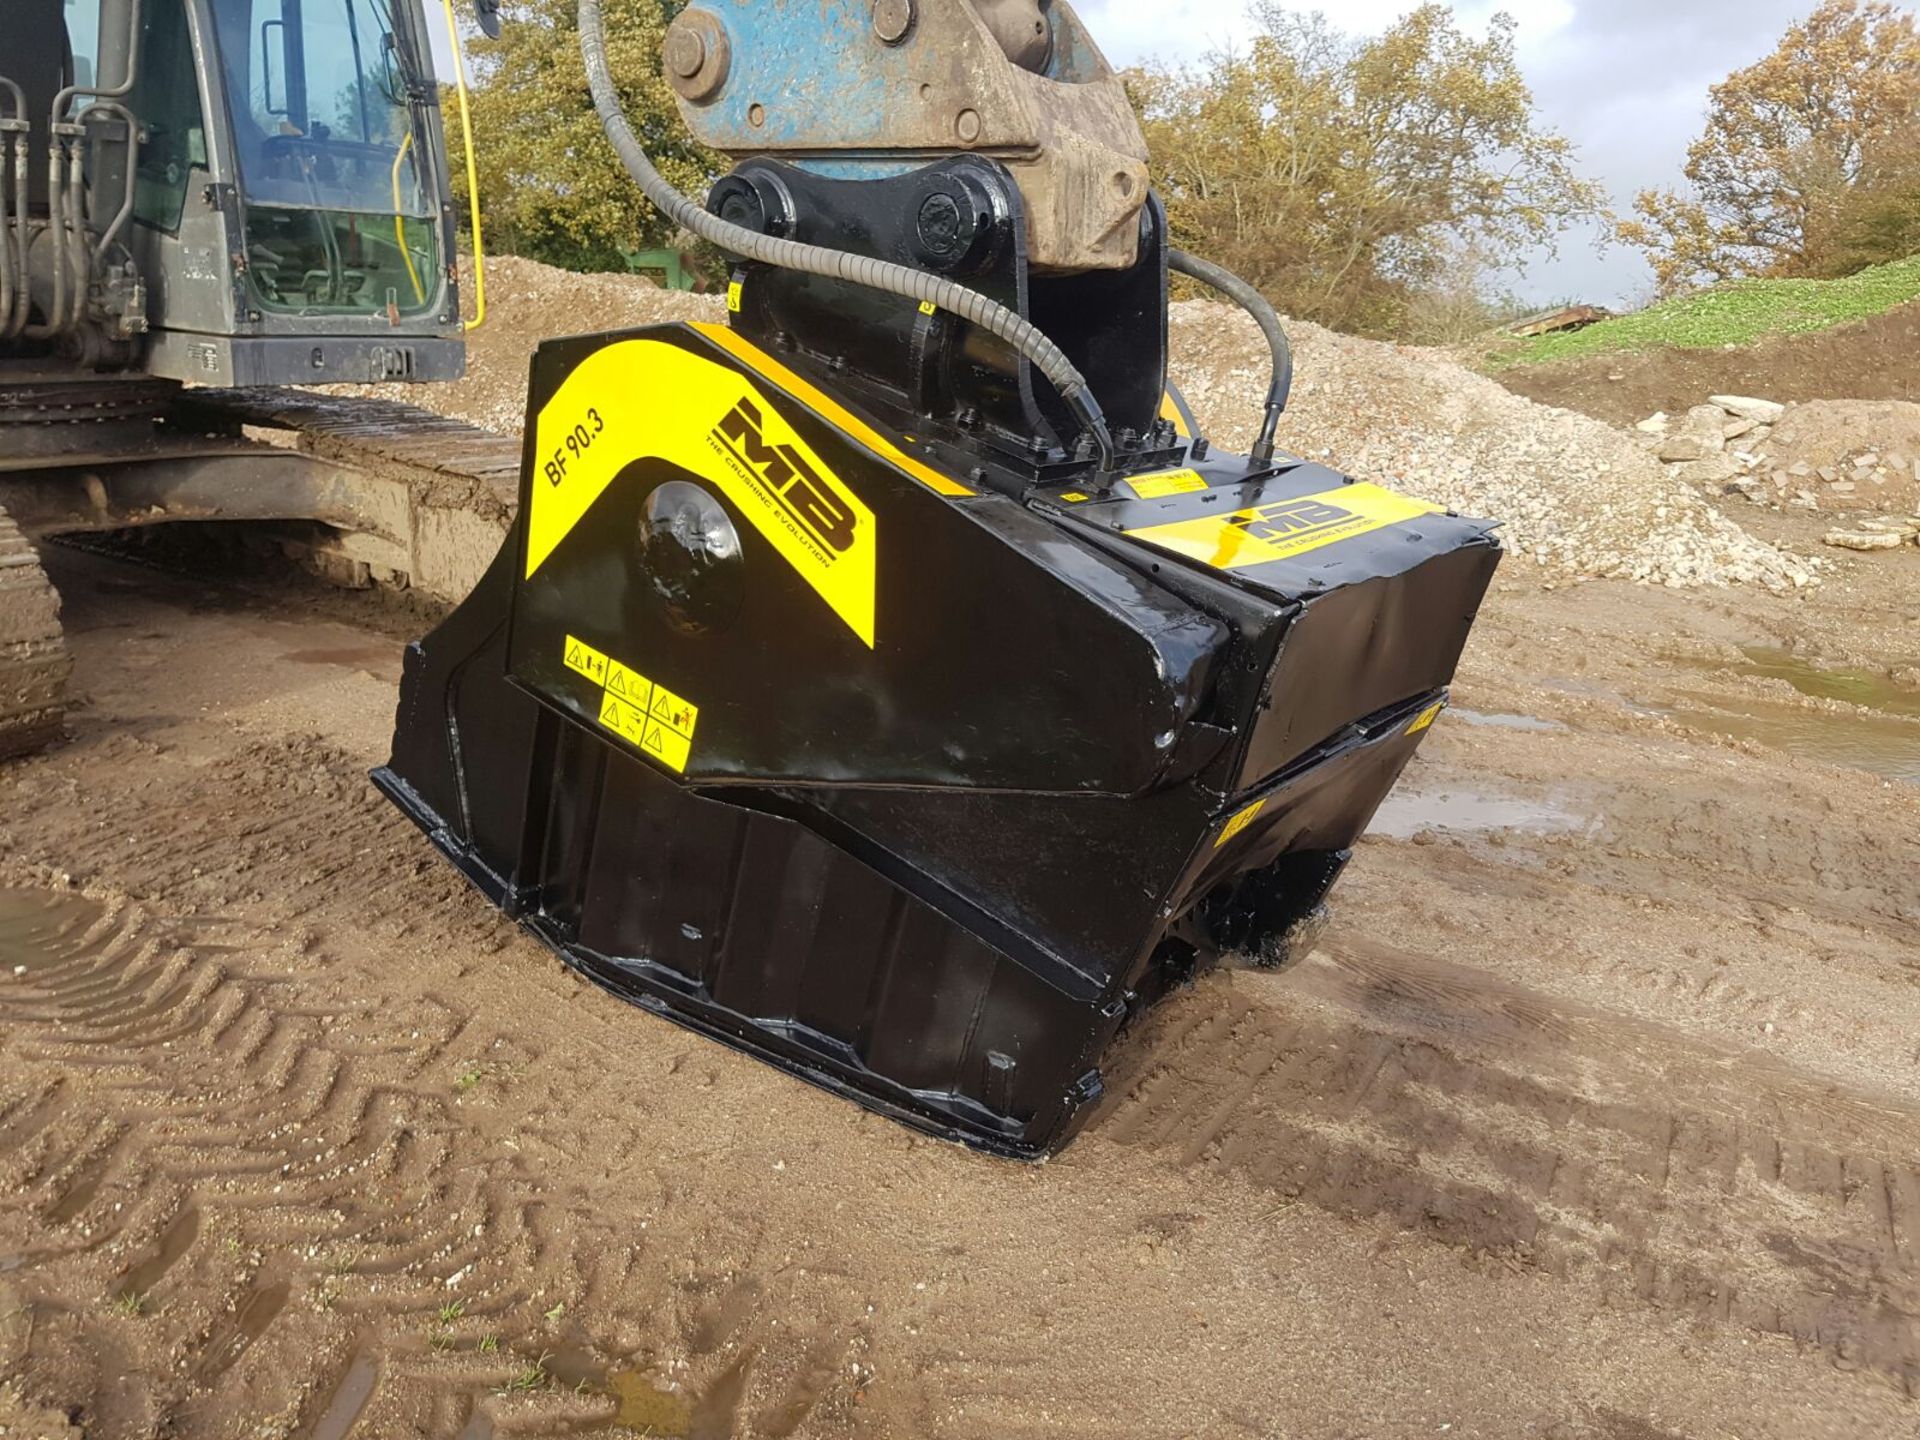 MB BF90.3 crusher bucket. 2008. Excellent working order. Jaws 85%. Just been sand blasted and